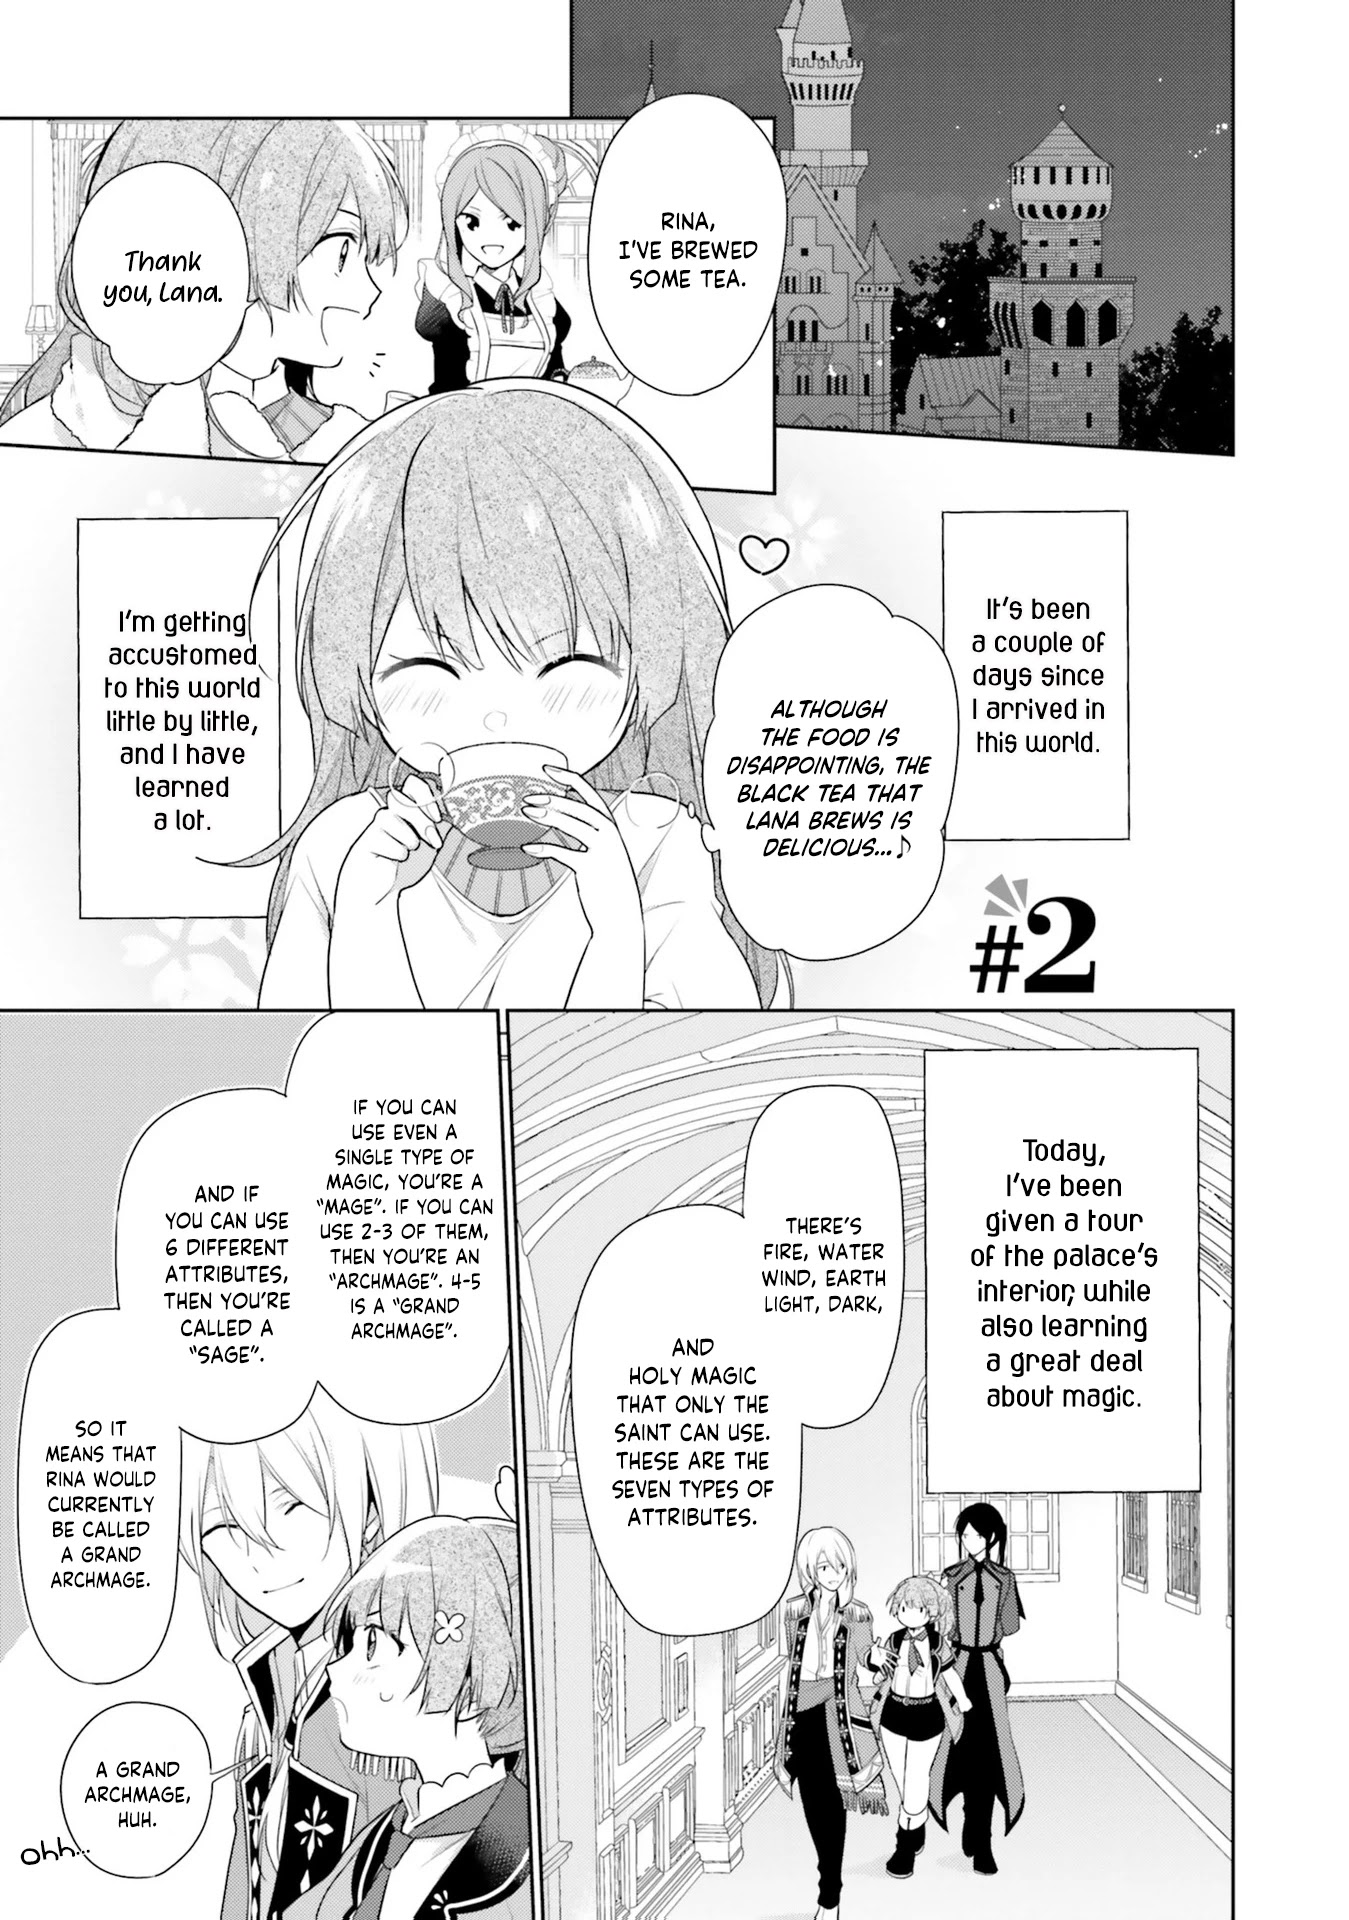 I'm Not The Saint, So I'll Just Leisurely Make Food At The Royal Palace - Page 1